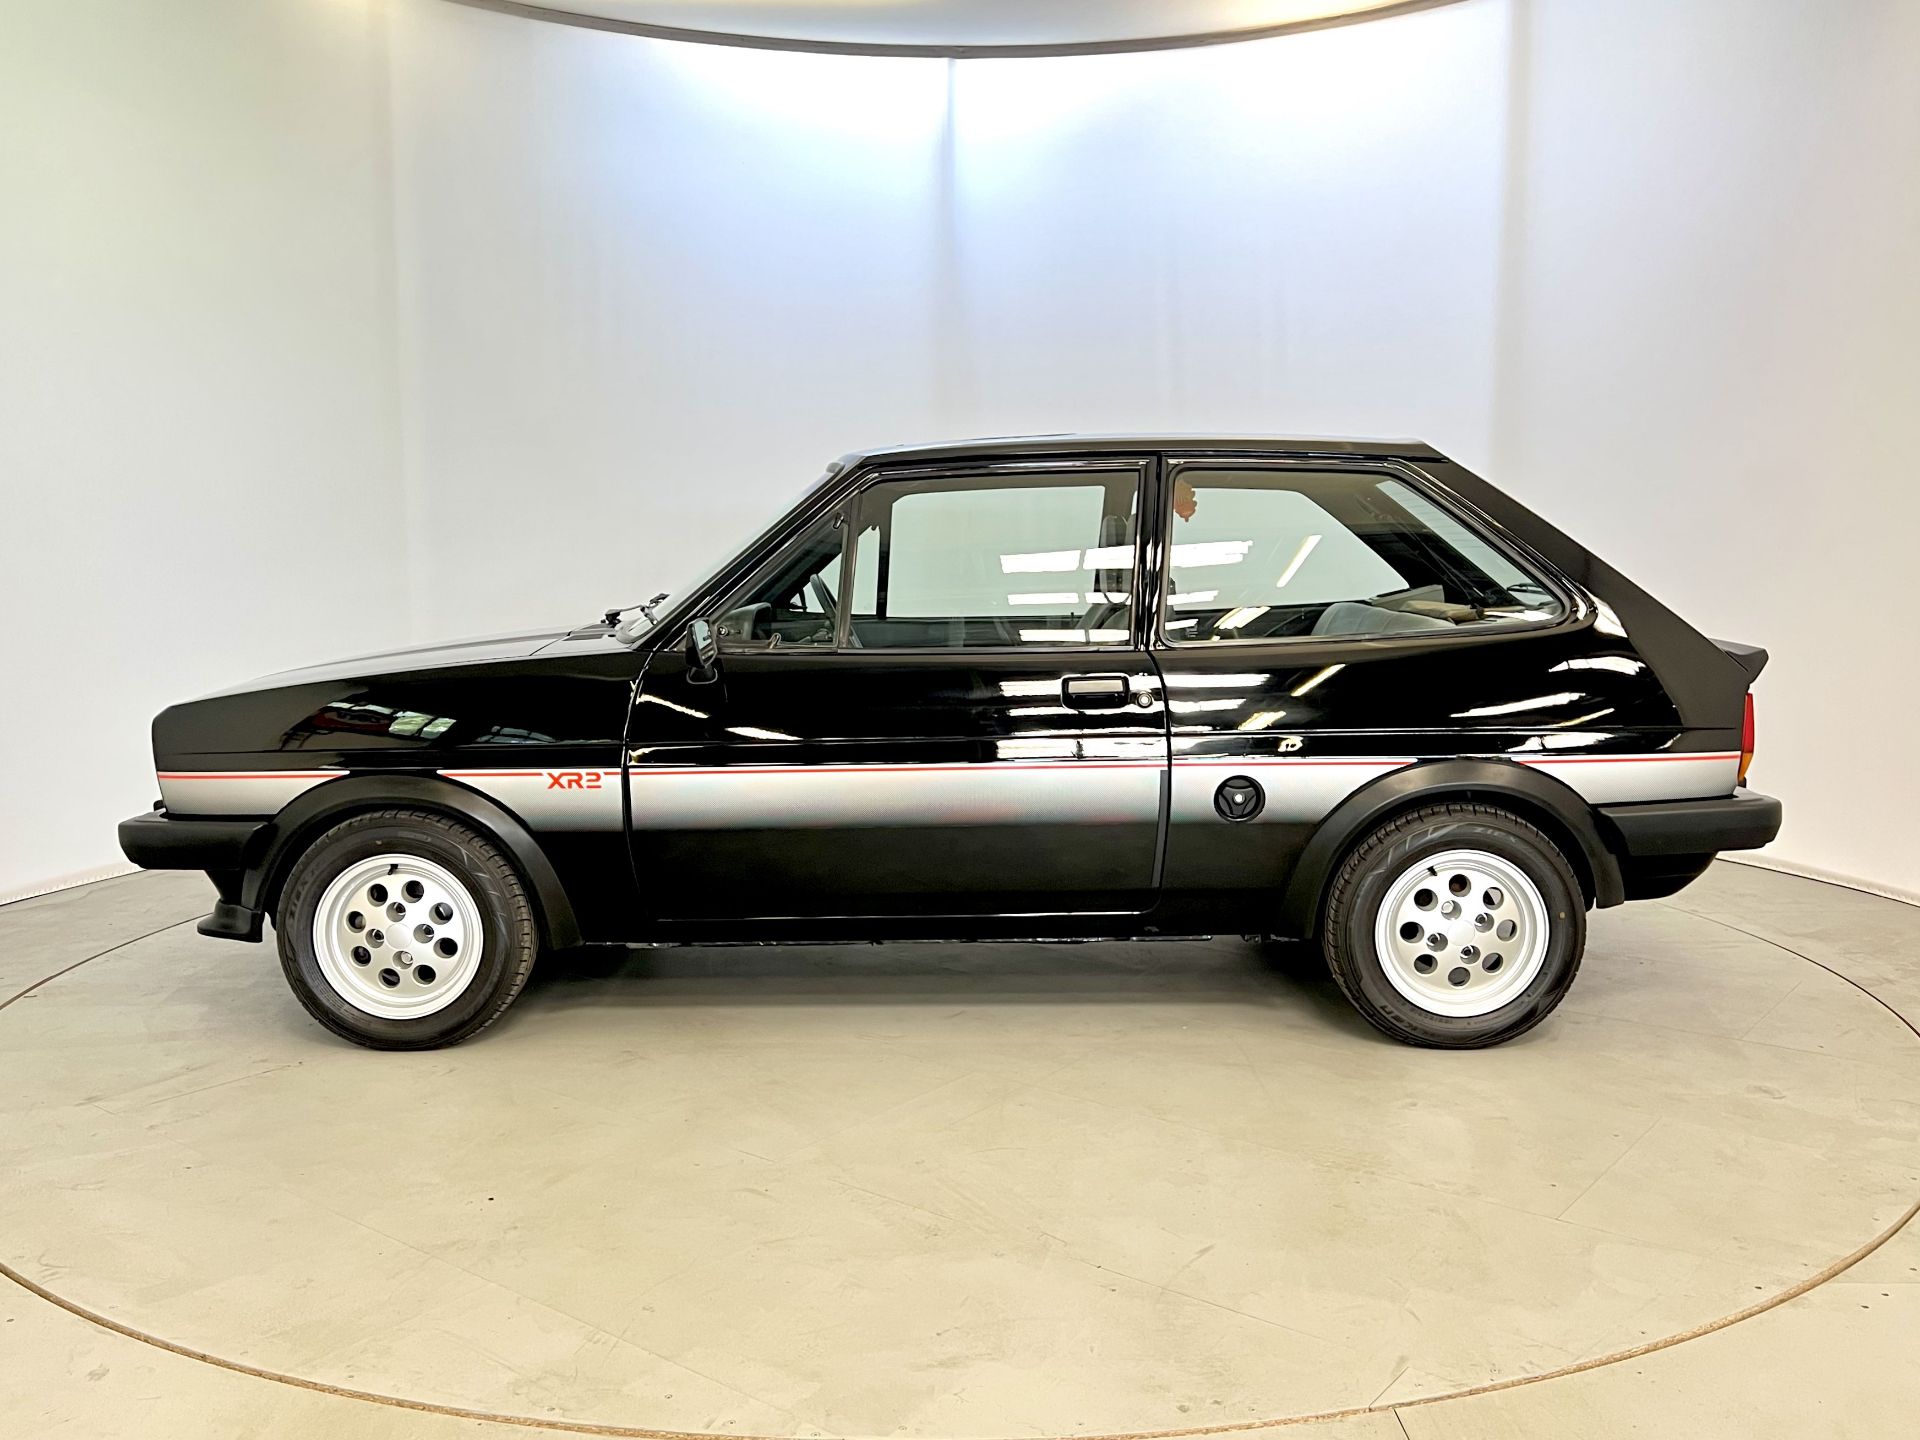 Ford Fiesta XR2 - Image 5 of 33